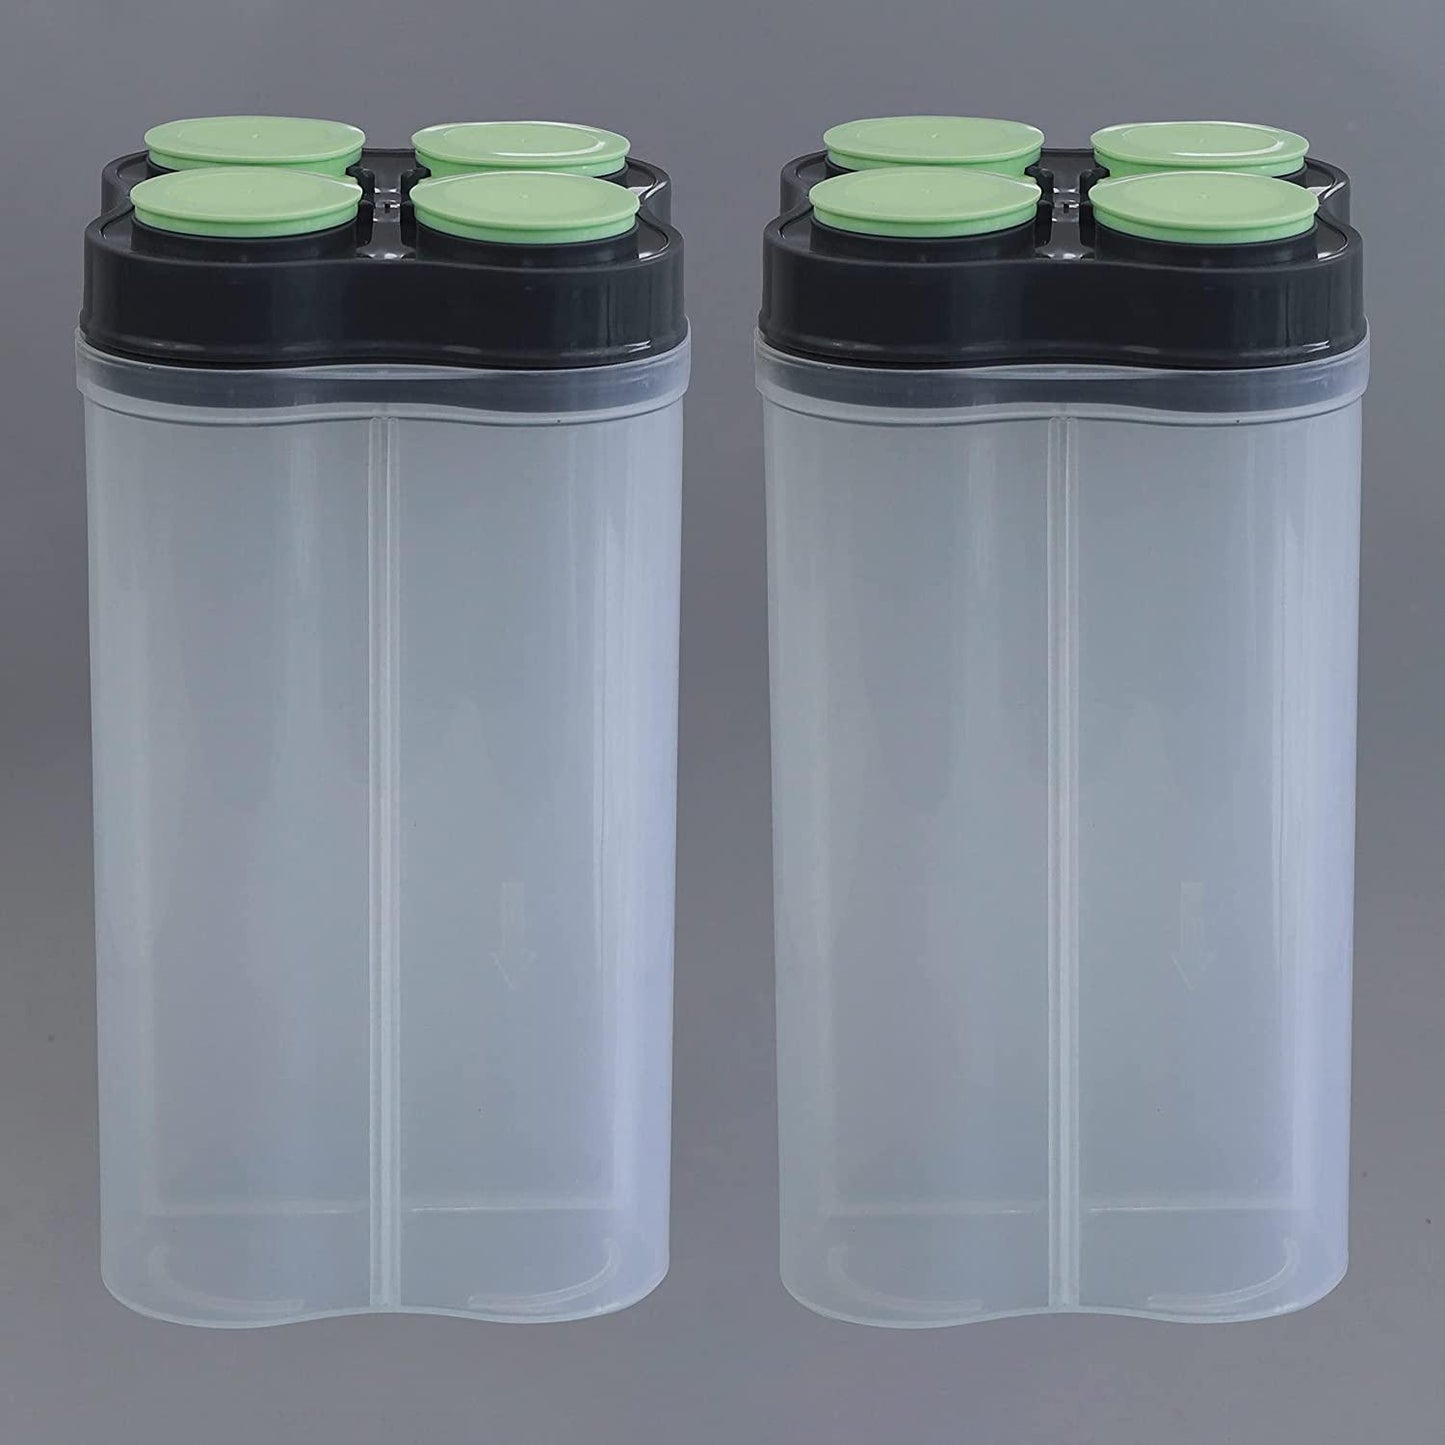 4 in 1 containers for  4 in 1 containers for storage storage